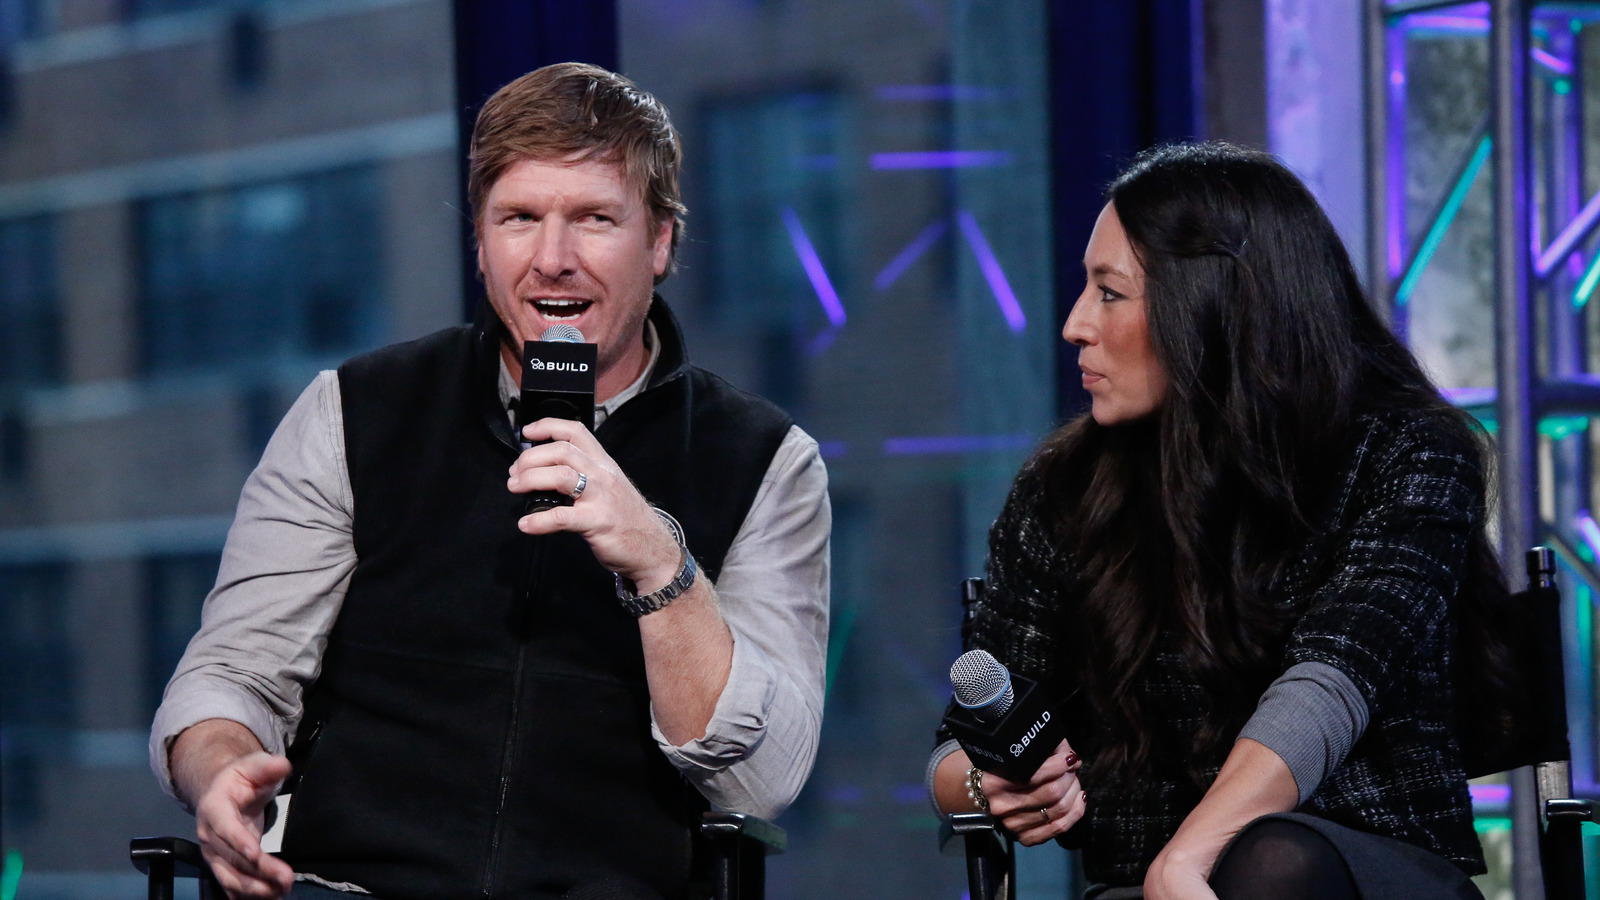 Fixer Upper - Where to Watch and Stream - TV Guide